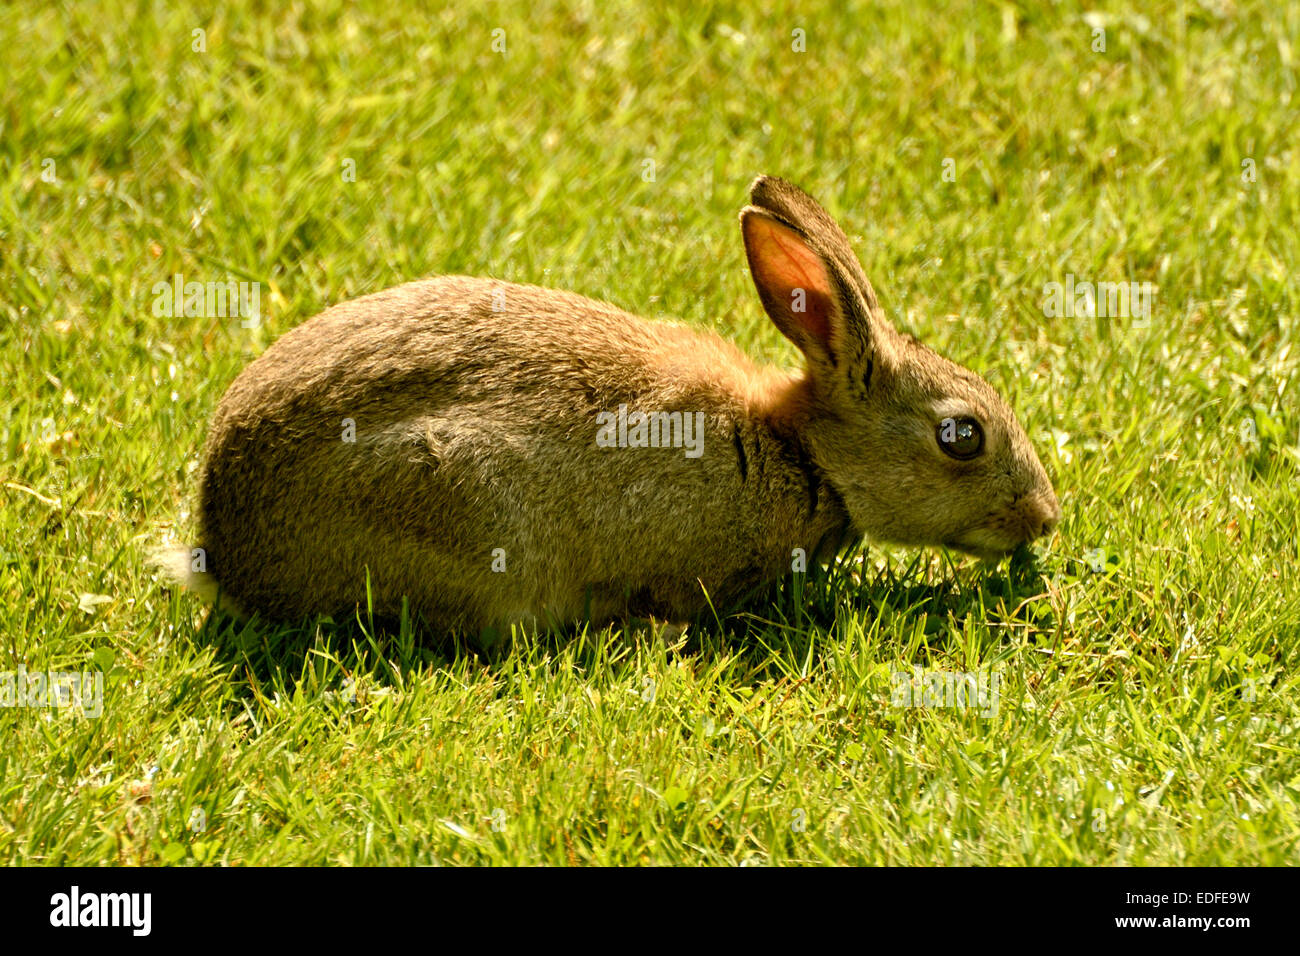 SINGLE RABBIT EATING GRASS ON A LAWN IN THE UK Stock Photo